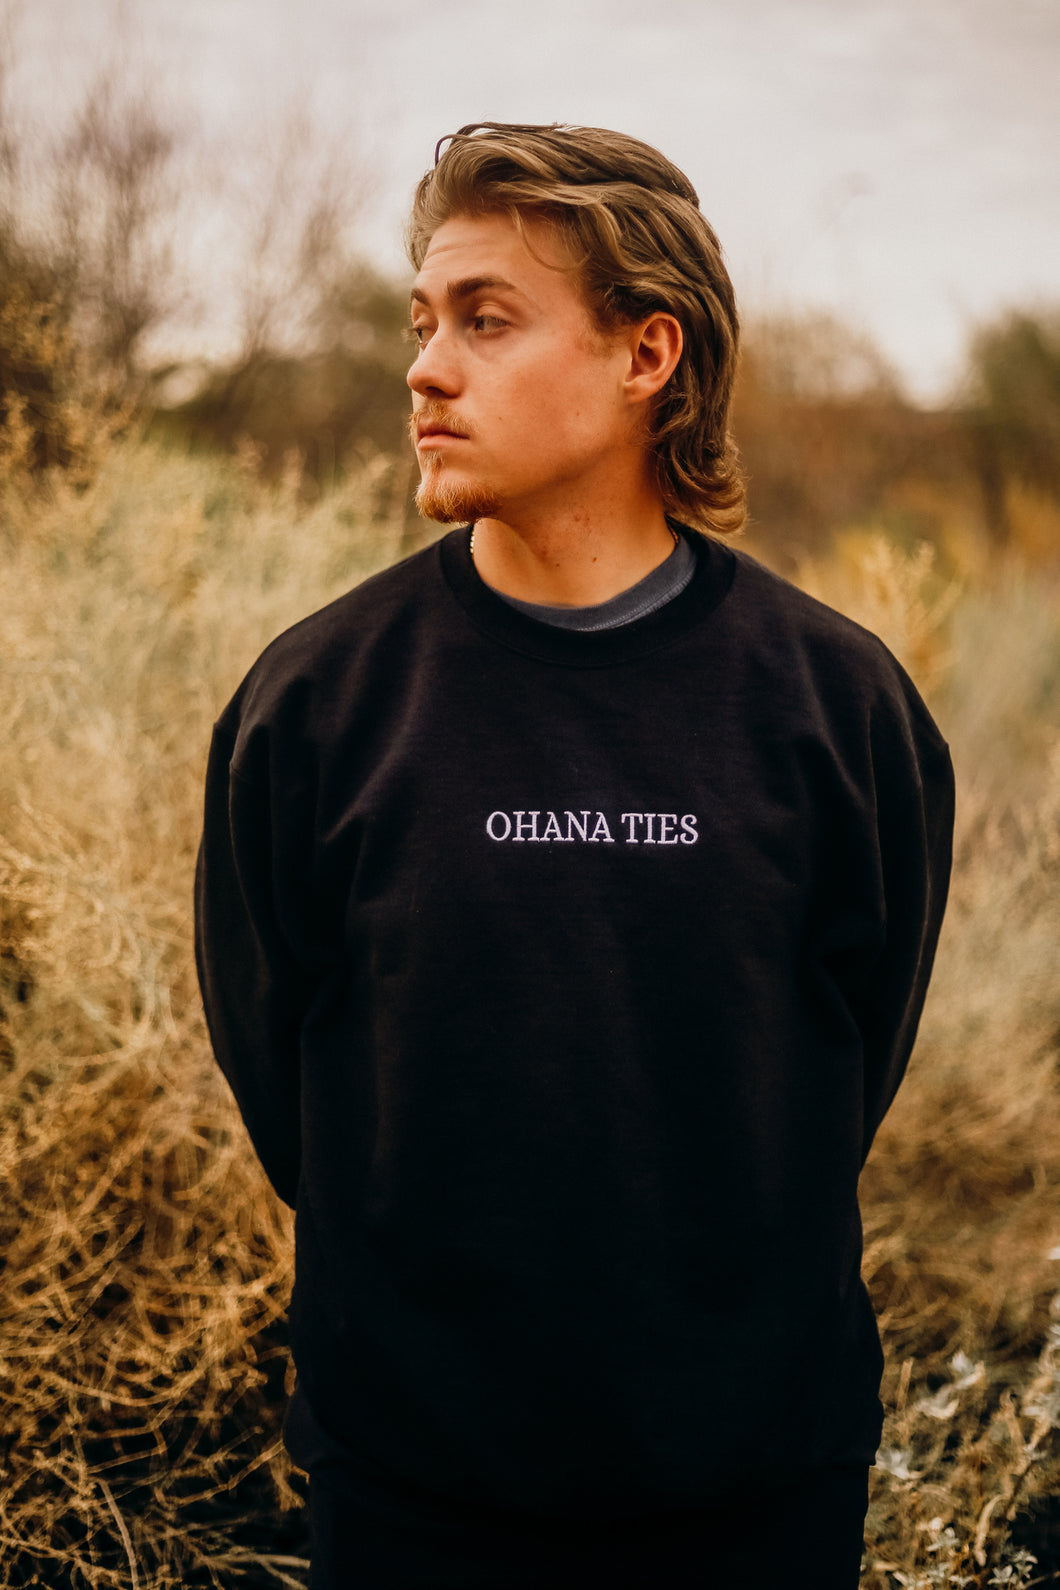 Ohana Ties Embroidered Sweater - Black and White